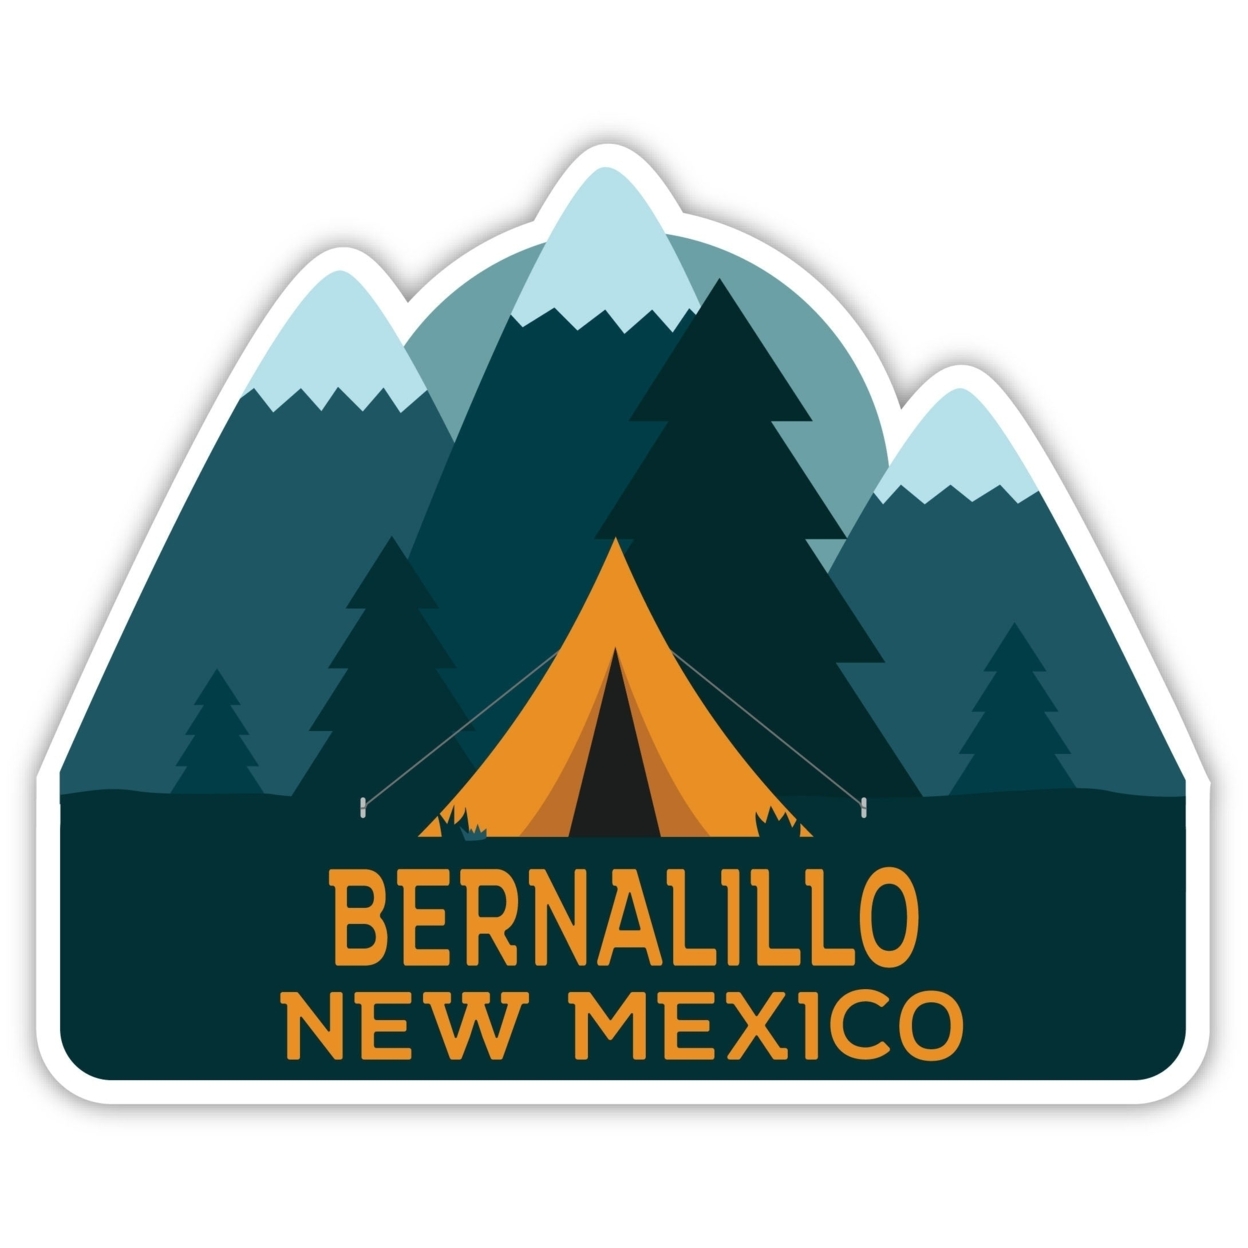 Bernalillo New Mexico Souvenir Decorative Stickers (Choose Theme And Size) - 4-Pack, 2-Inch, Tent